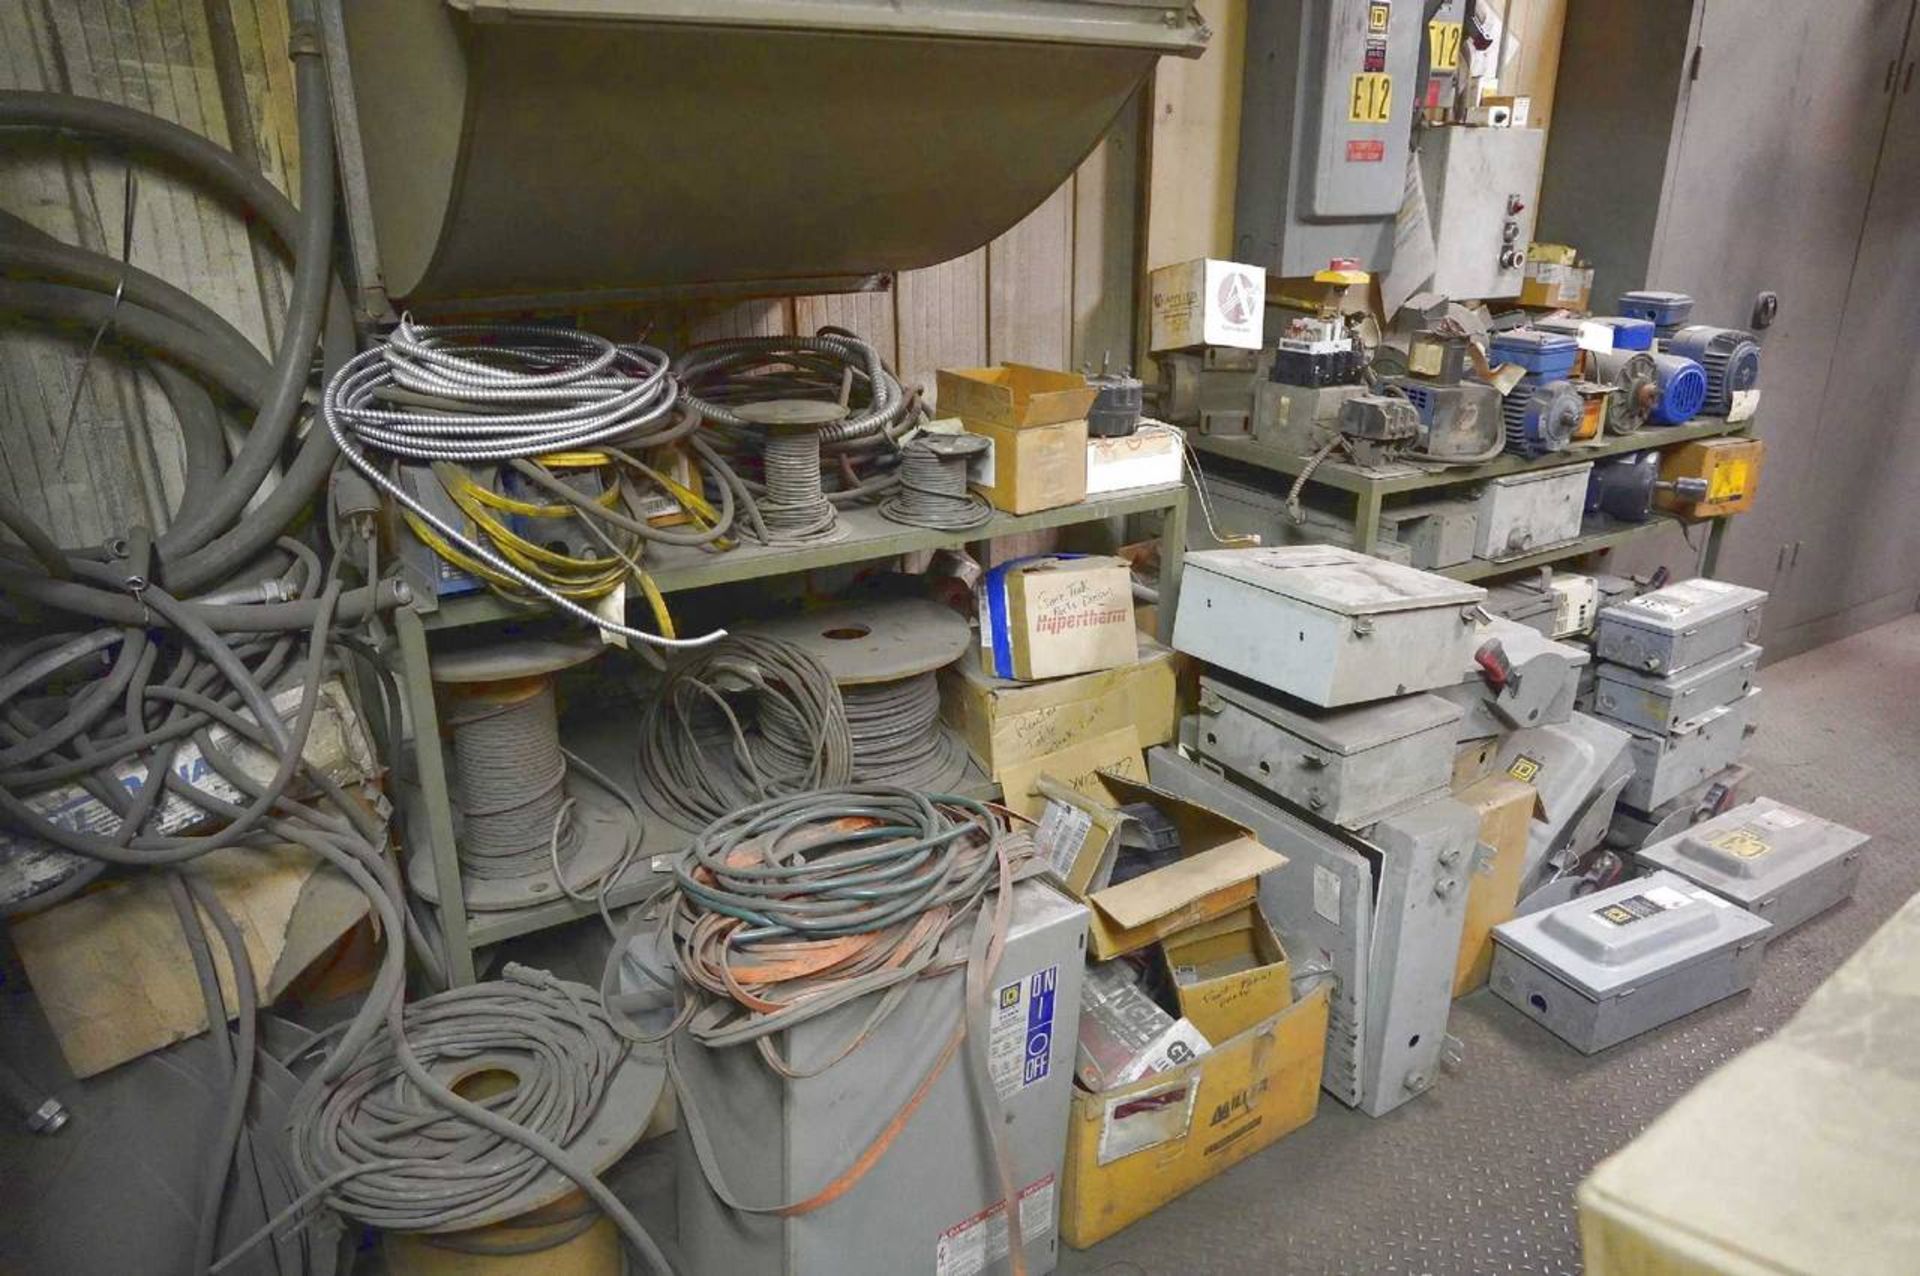 Contents of Compressor Room - Image 5 of 16